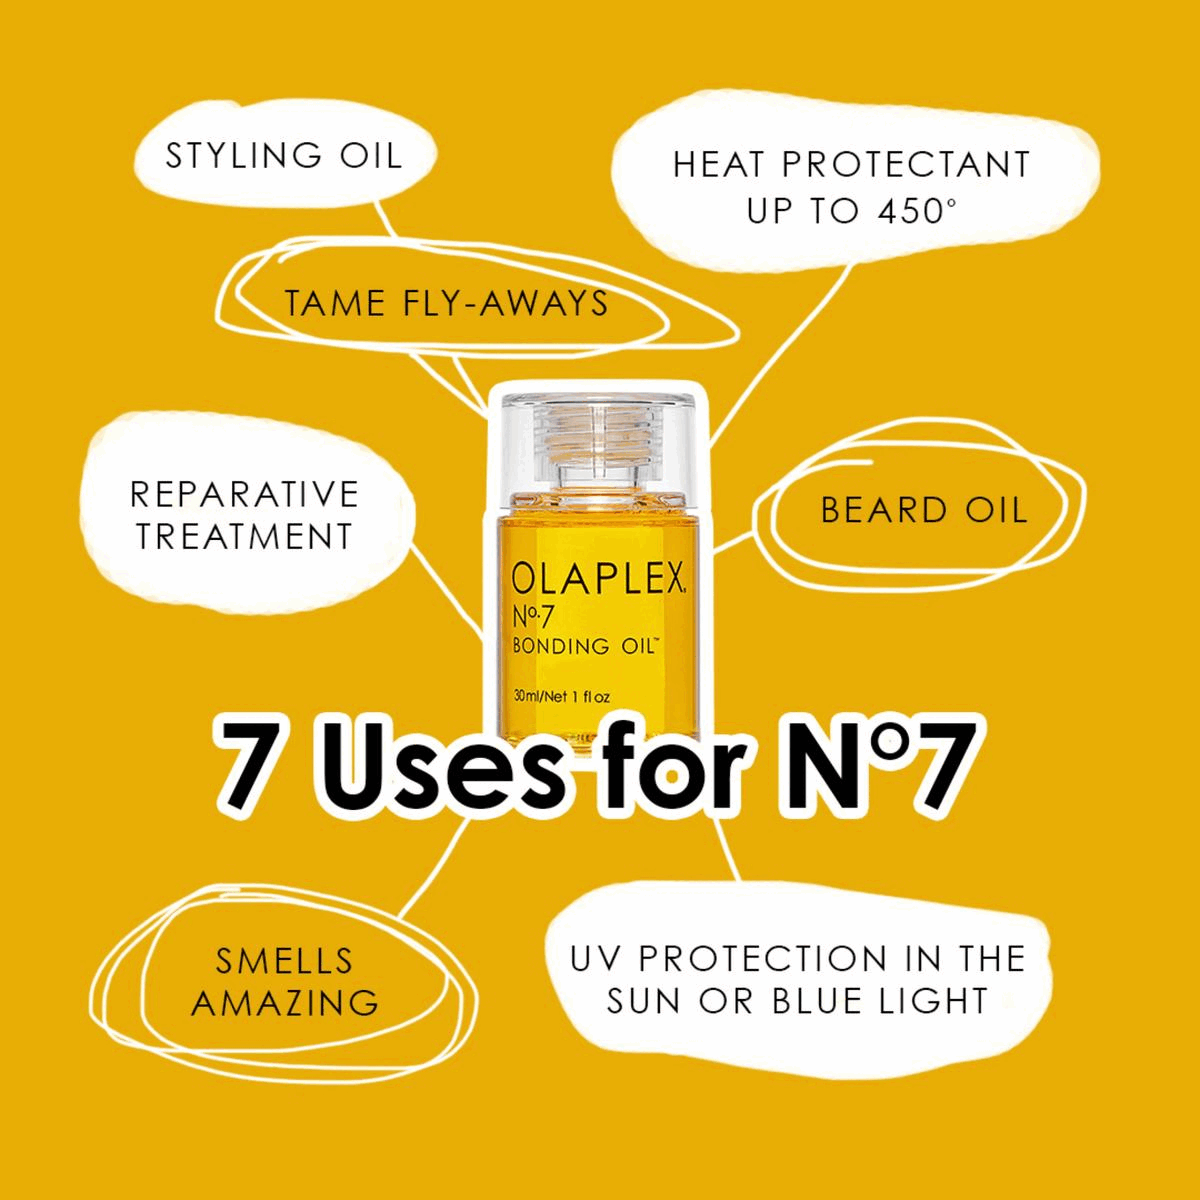 Image 1, 7 Uses for No7, Styling Oil, Tame fly-aways. Heat protectant up to 450 degrees beard oil, UV protection in the sun or blue light, smells amazing, reparative treatment. Image 2, The environment come first, together with out updated carbon negative footprint from 2015 to 2021. We eliminate 35mm pounds of GHG from being emitted to the environment. We save 44k gallons of water from being wasted. We protect 57mm trees from being deforested. Image 3, All Hair Types, PH Balanced, Vegan, Cruelty Free,, Gluten Free, Nut Free, Paraben Free, Phthalates Free, Phosphate Free, Sulfate Free. Image 4, Hair Cuticle Before, Hair Cuticle After.